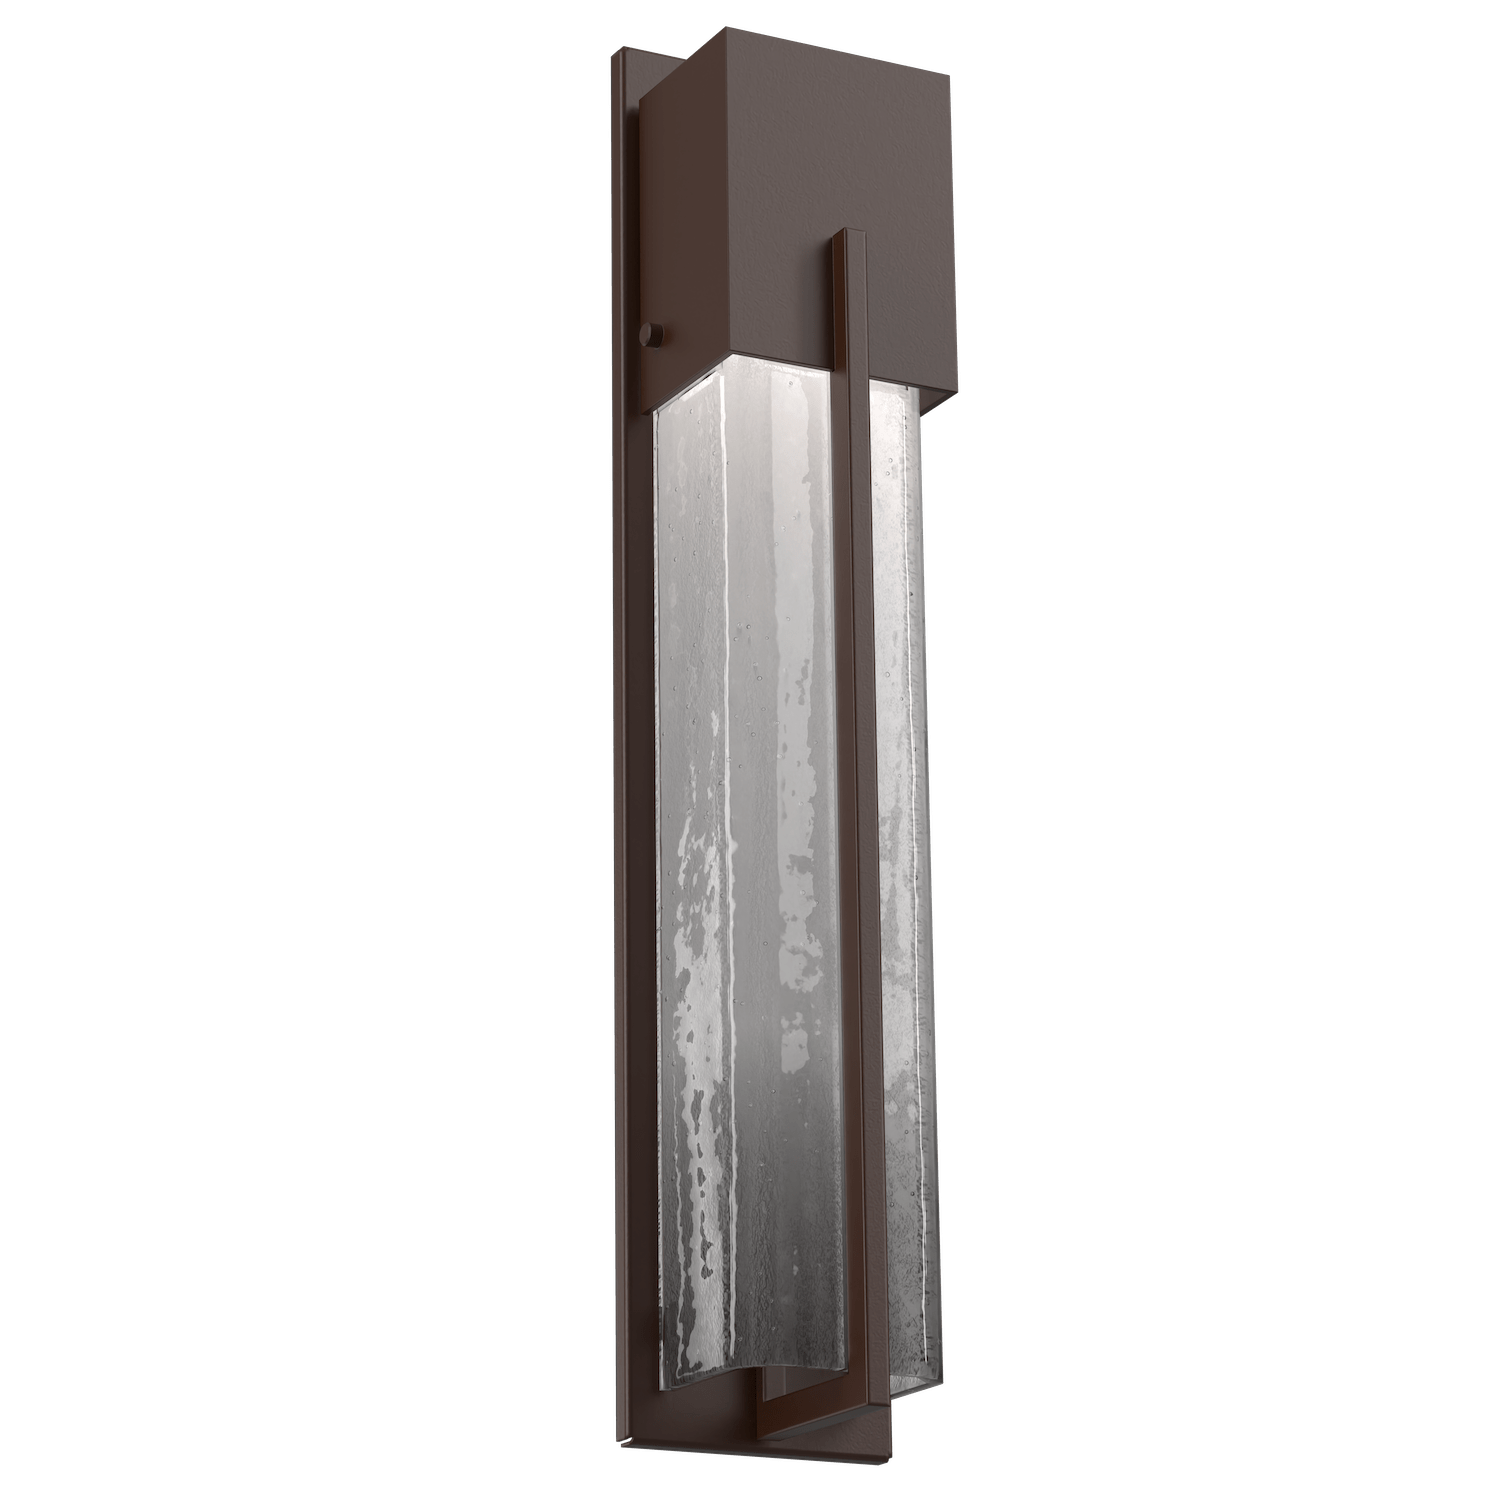 Hammerton Studio Square Outdoor Cover LED Sconce Outdoor l Wall Hammerton Studio 23 Statuary Bronze (Outdoor) Frosted Granite